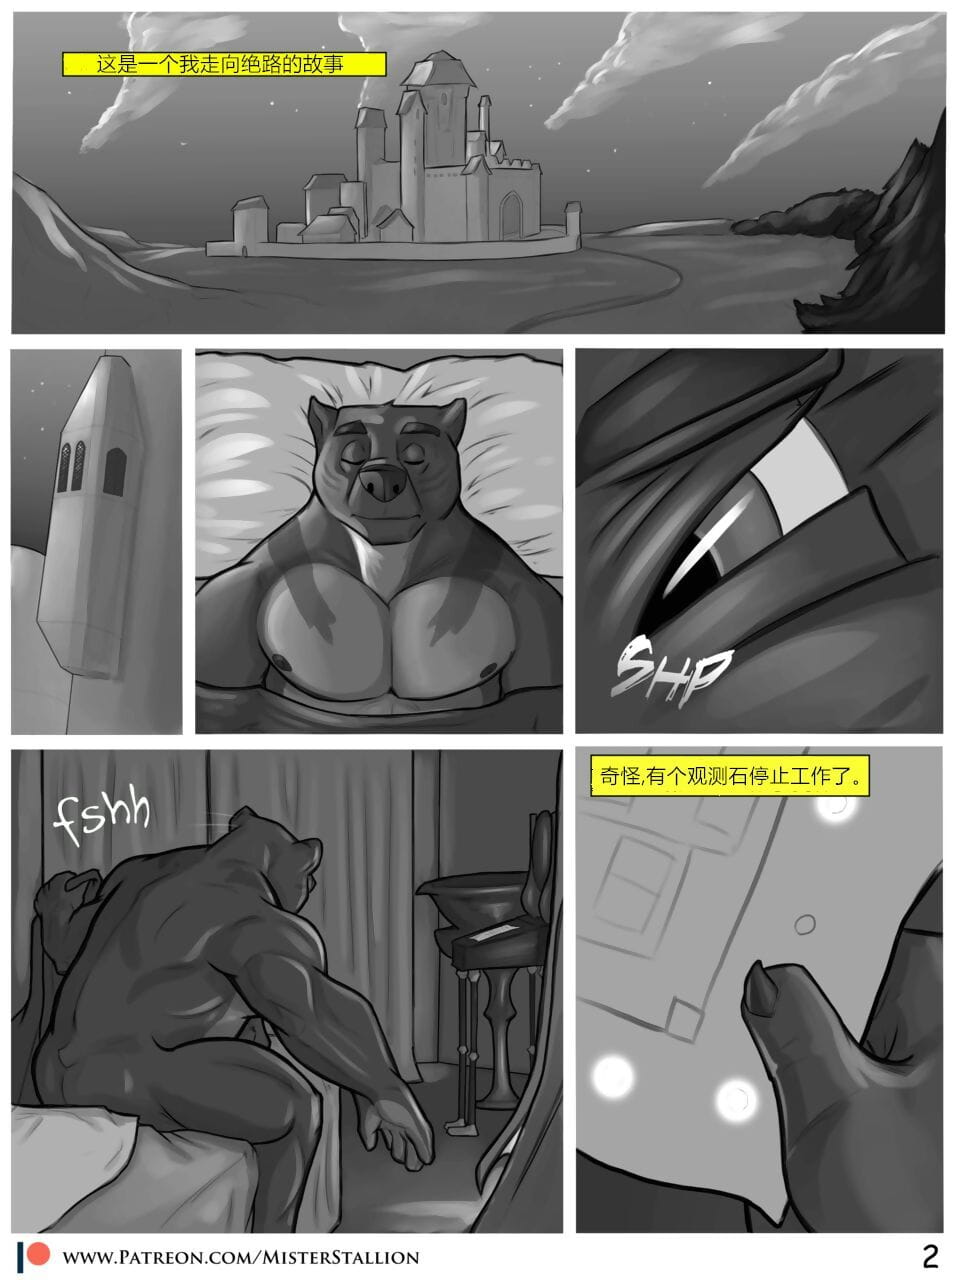 Forest Fires - 林中欲火 page 1